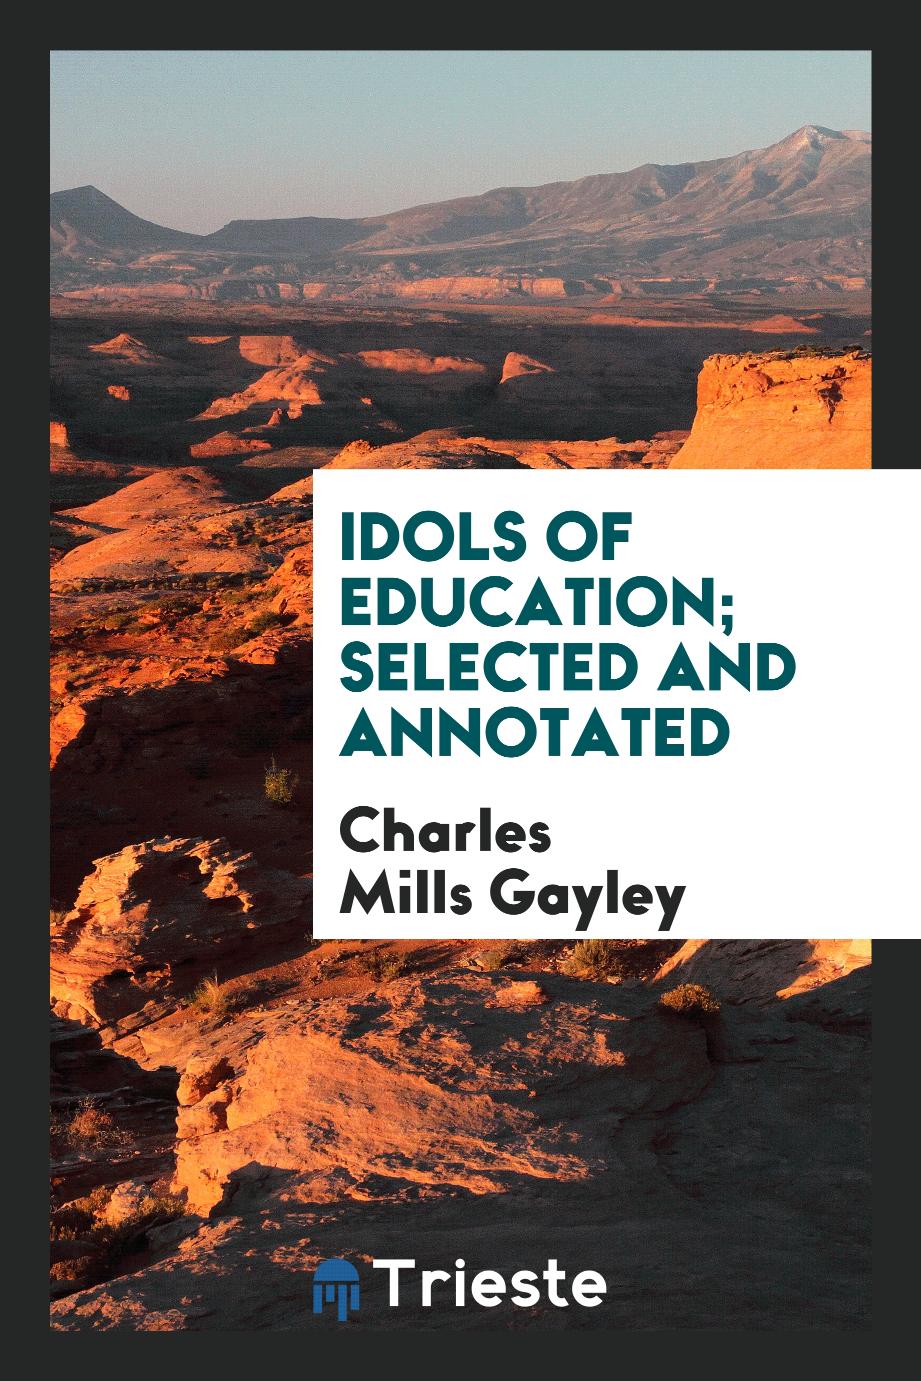 Idols of education; selected and annotated